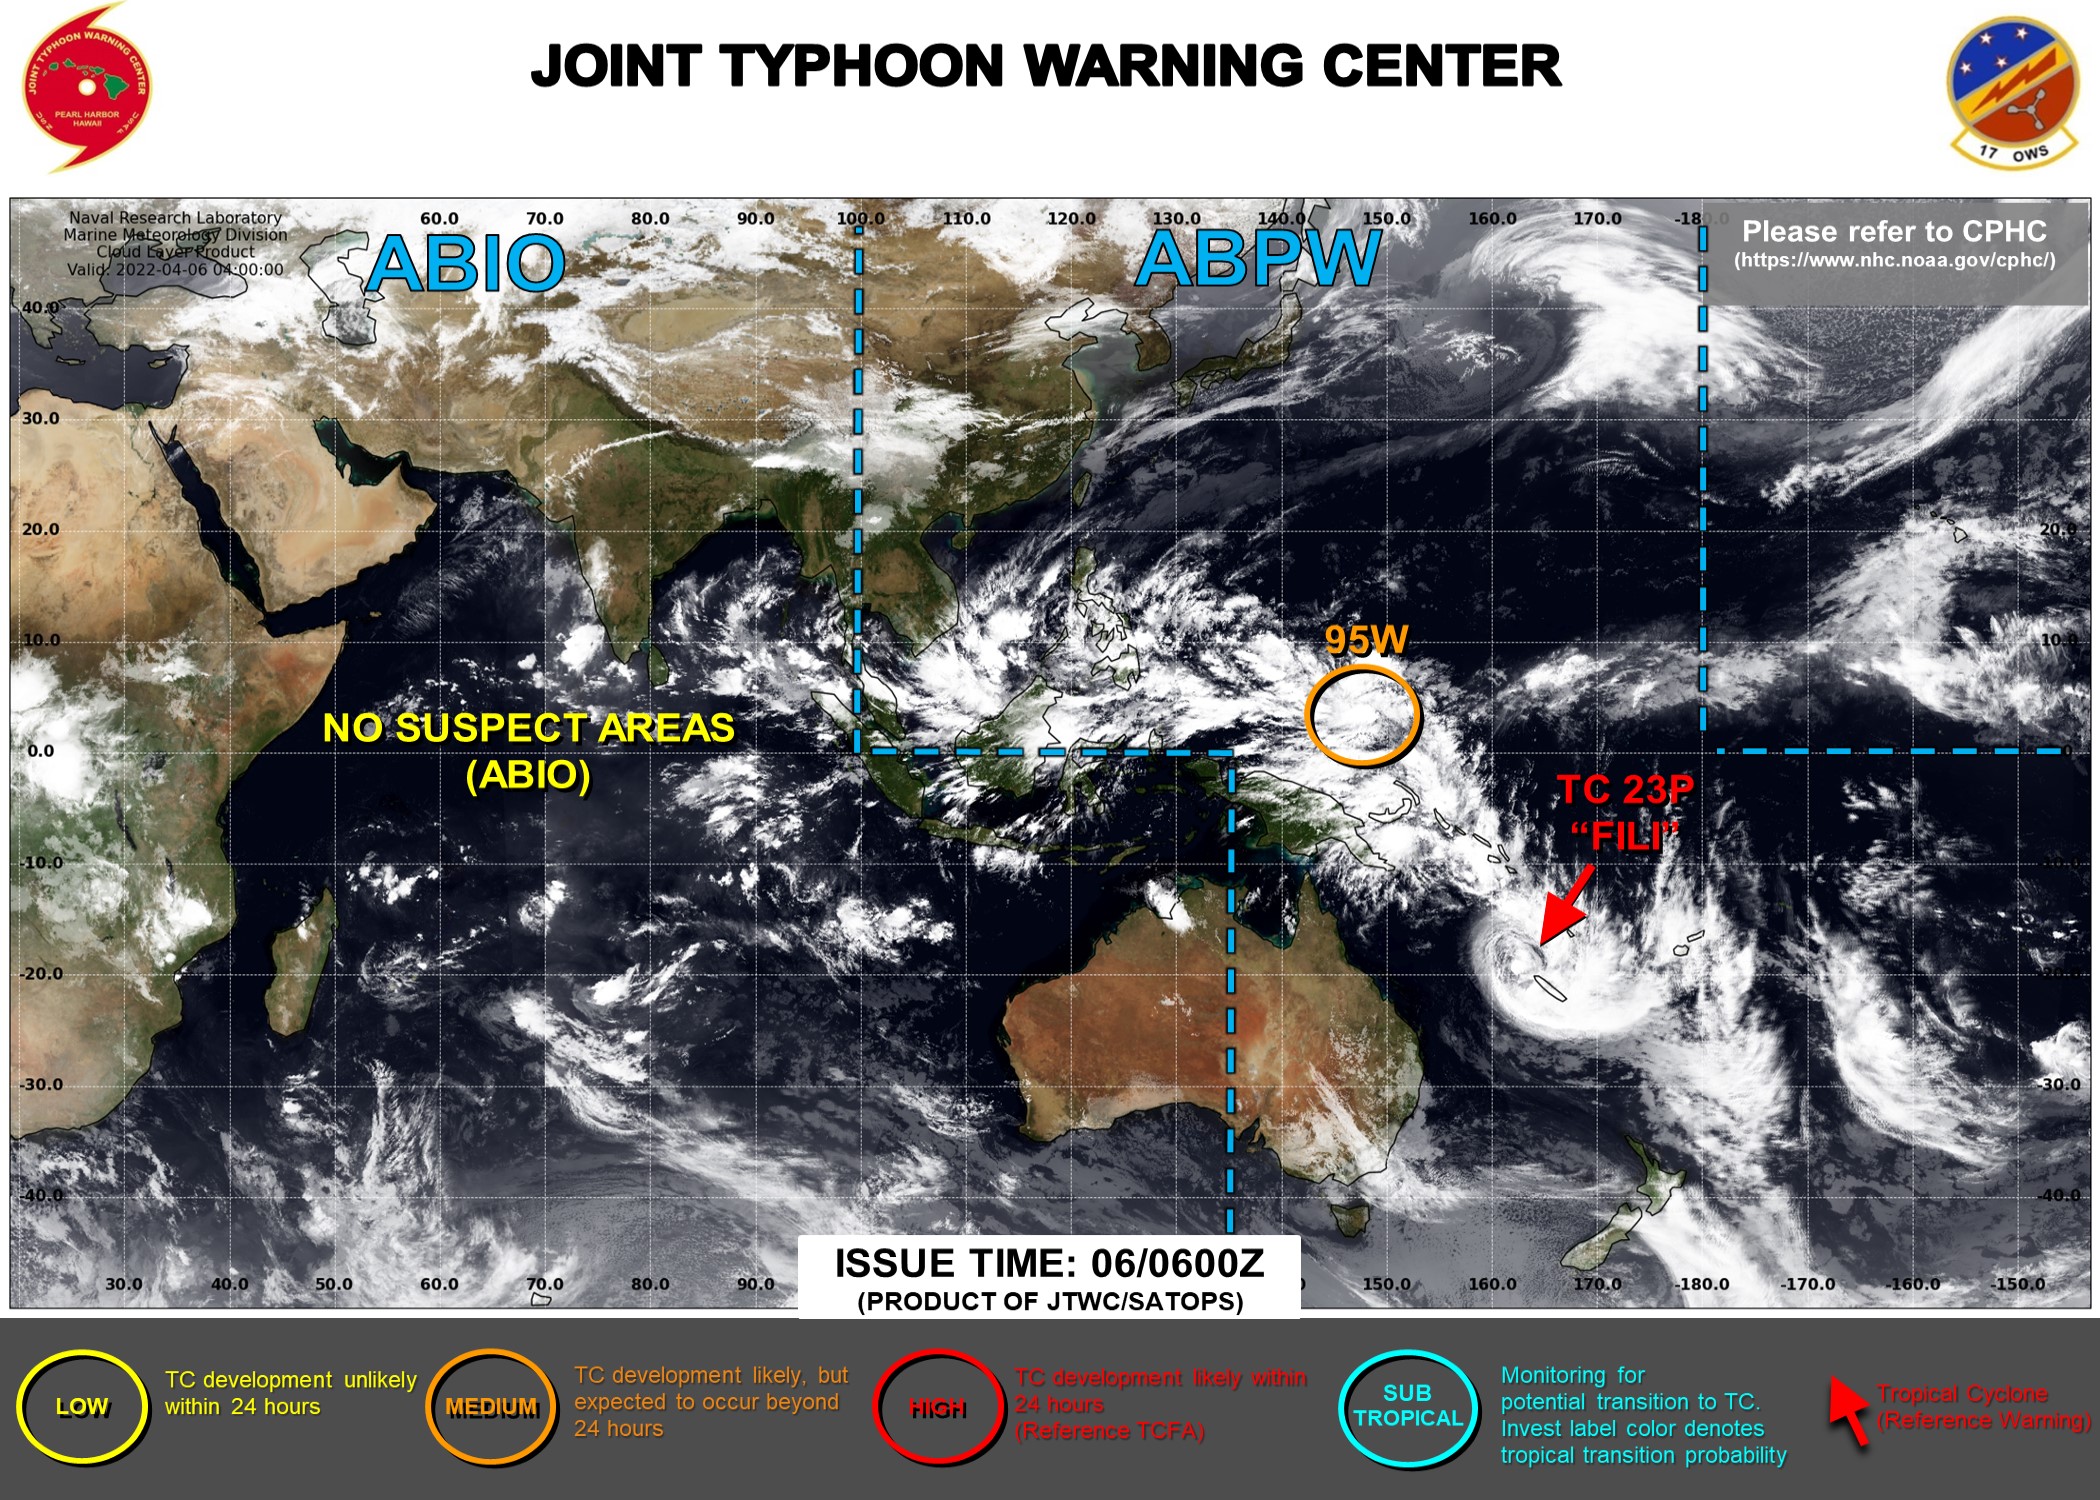 JTWC IS ISSUING 6HOURLY WARNINGS AND 3HOURLY SATELLITE BULLETINS ON TC 23P(FILI).